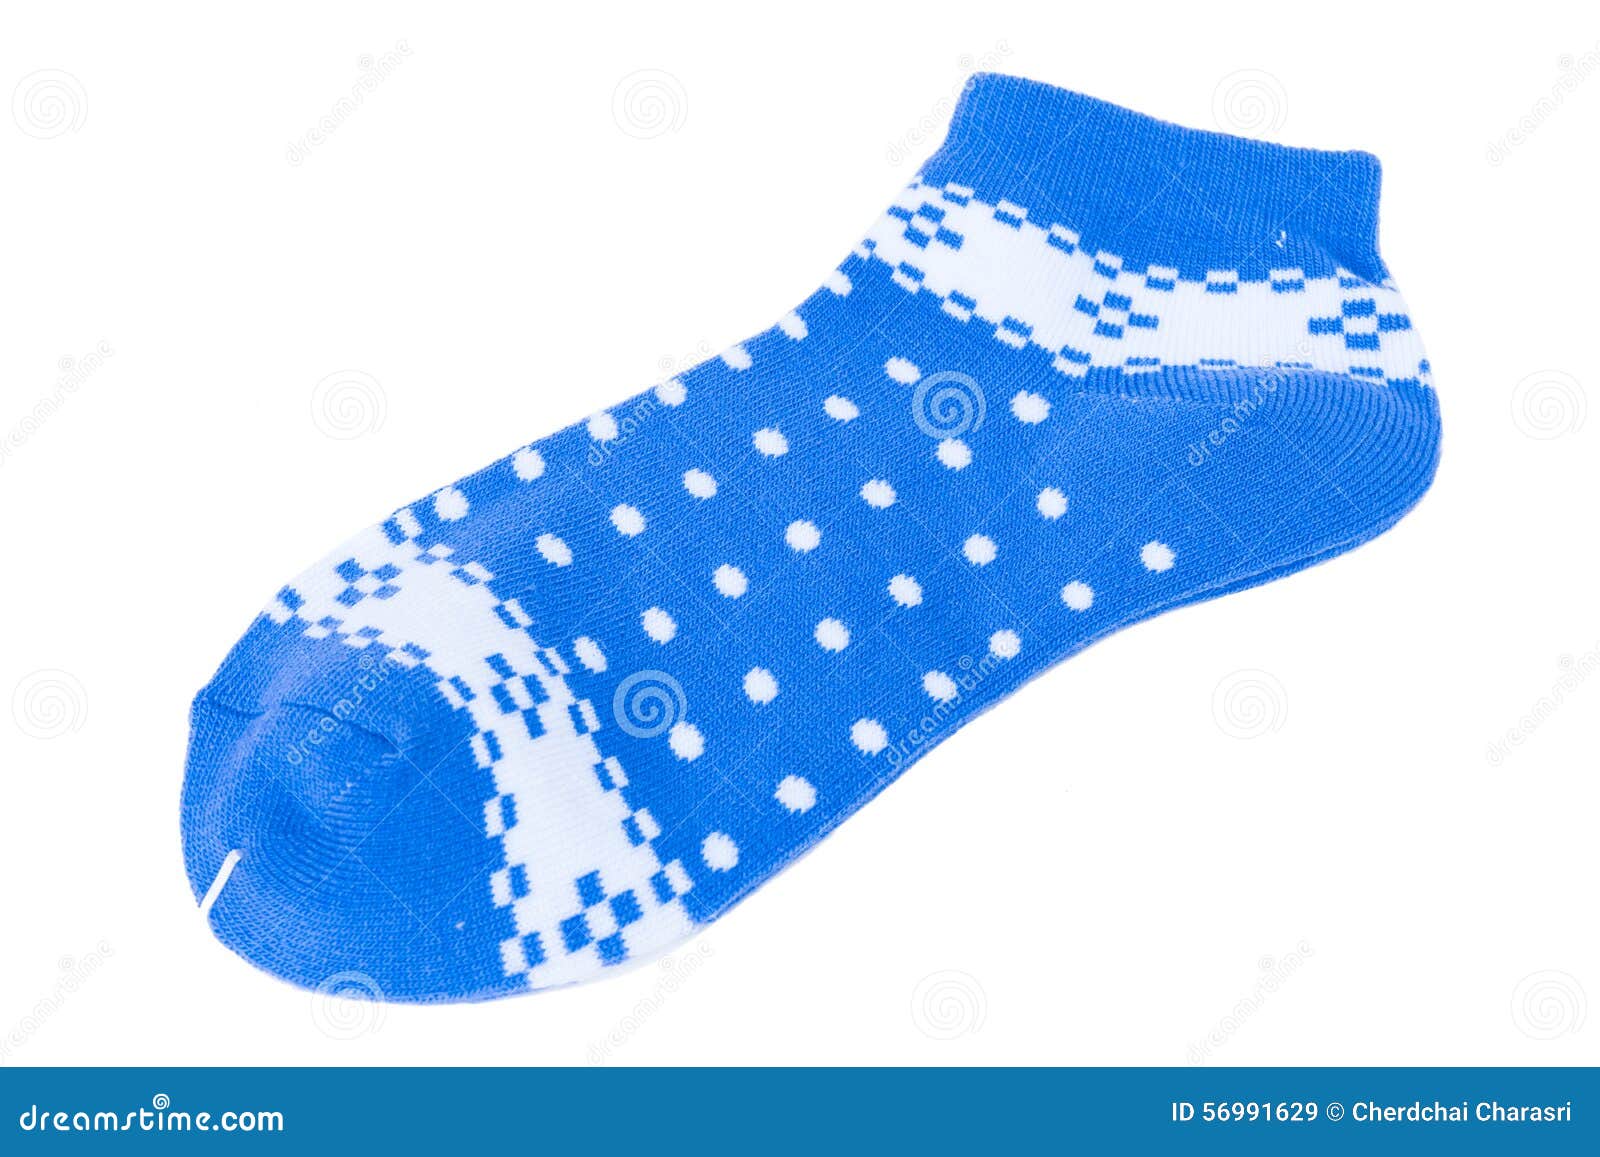 Pair of Socks. Isolated on a White Background Stock Image - Image of ...